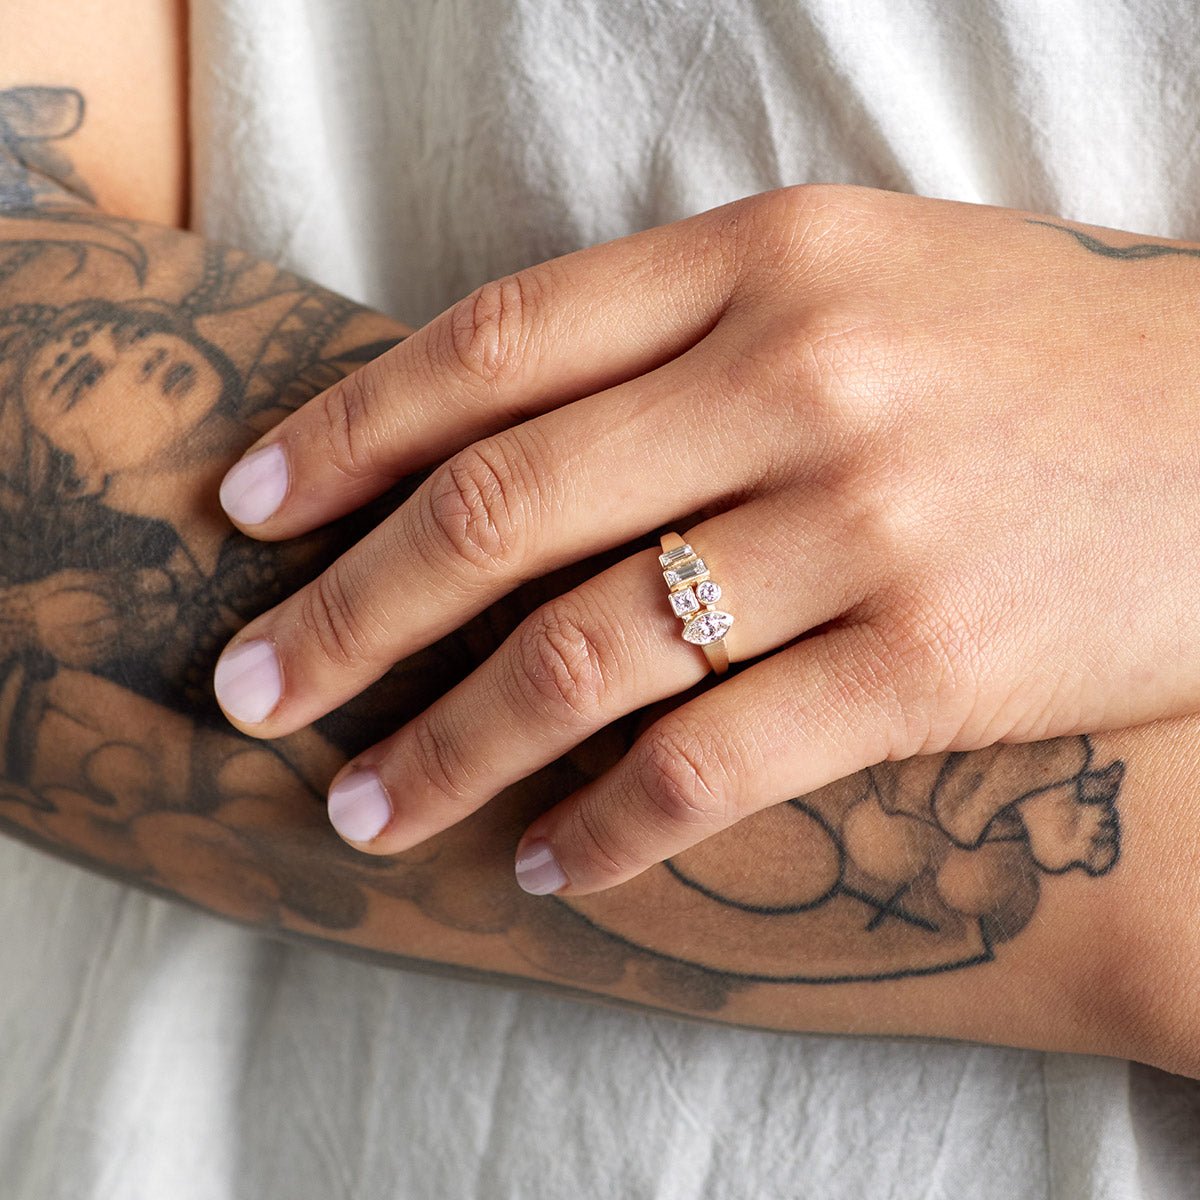 Model wears the Astrum ring on their left hand. The Astrum ring features 5 lab-grown diamonds and recycled 14K gold.